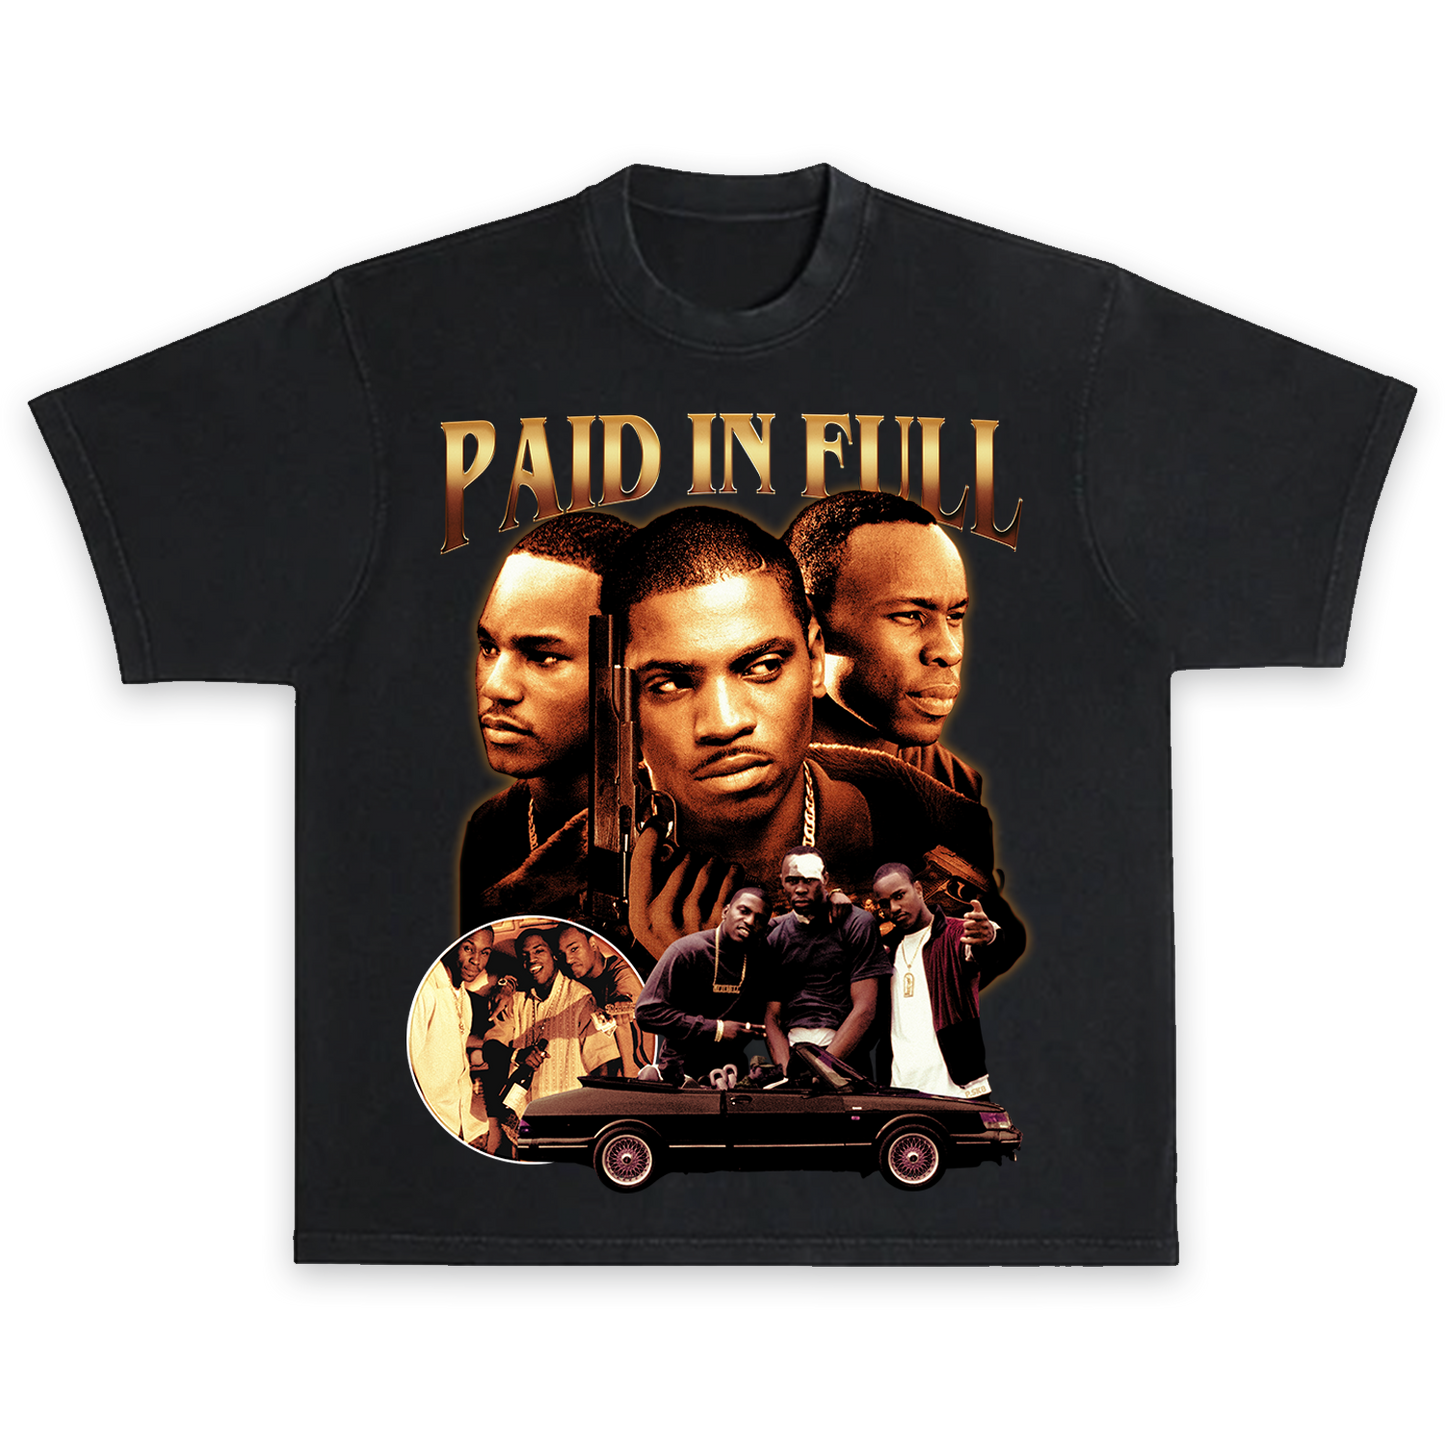 "Paid in Full"